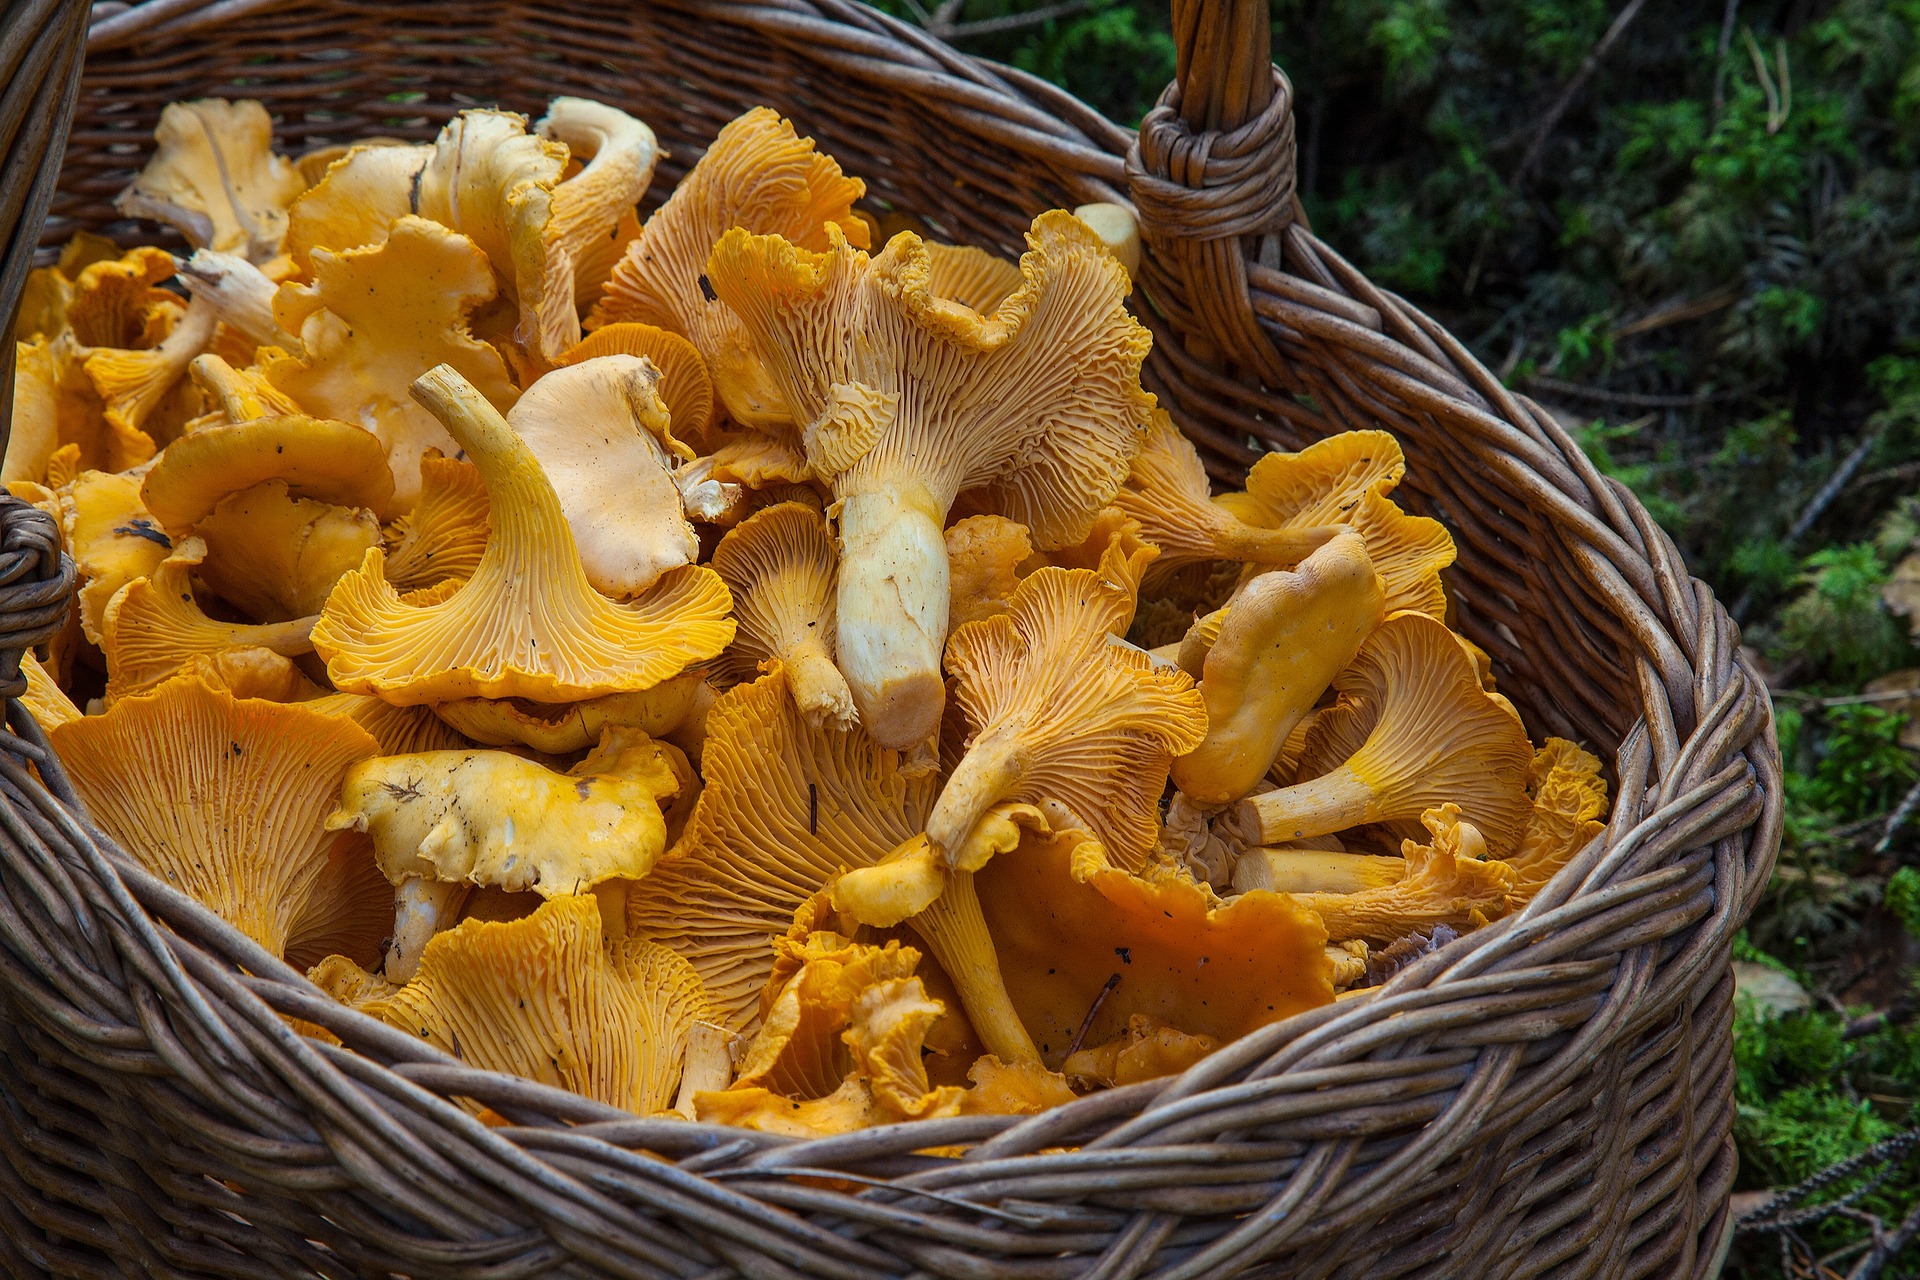 Basket of yellow chanterelle mushrooms on a green forest floor